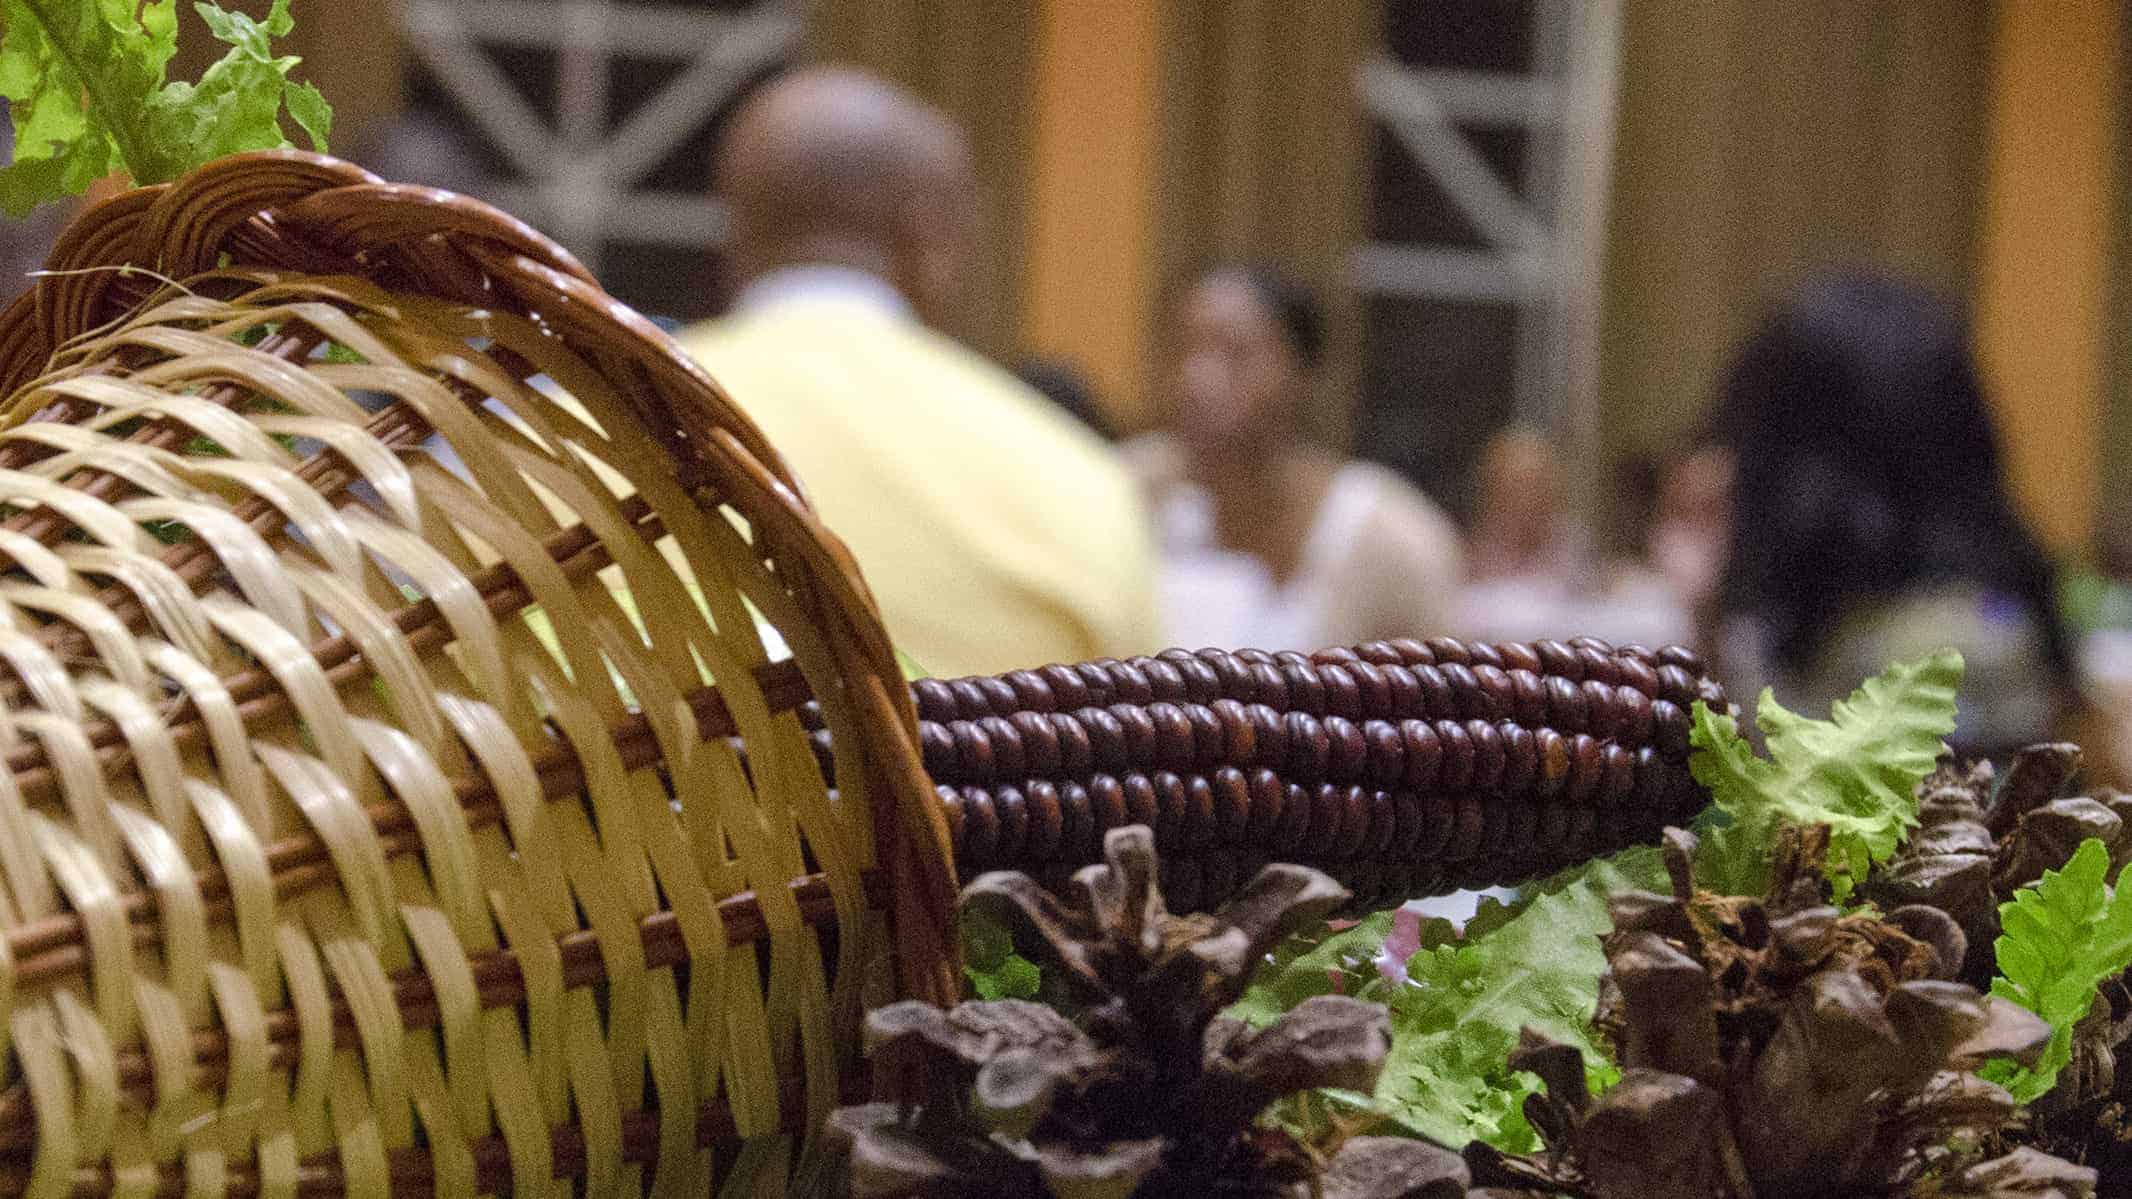 A cup, corn and other Kwanzaa symbols celebrate the holiday. Creative Commons courtesy photo from Penn State